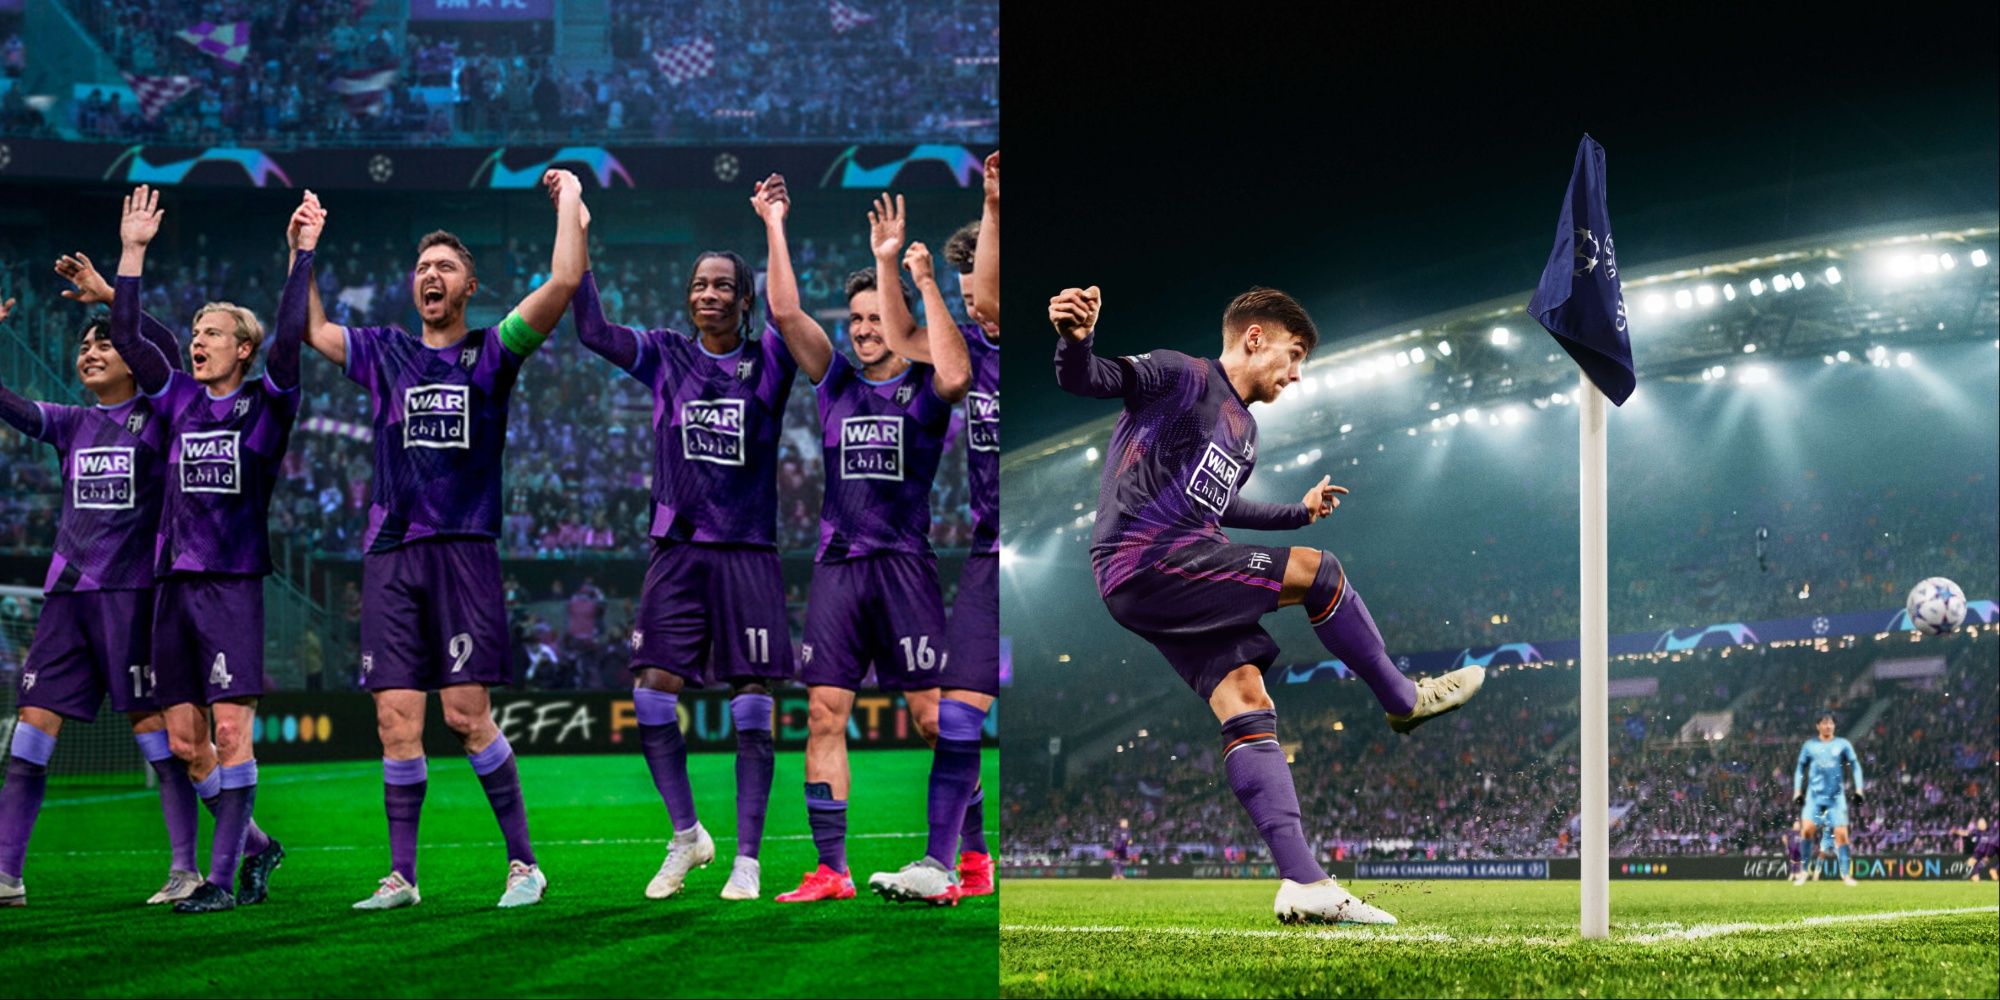 A collage of two promotional pictures showing players cheering and one kicking a corner.